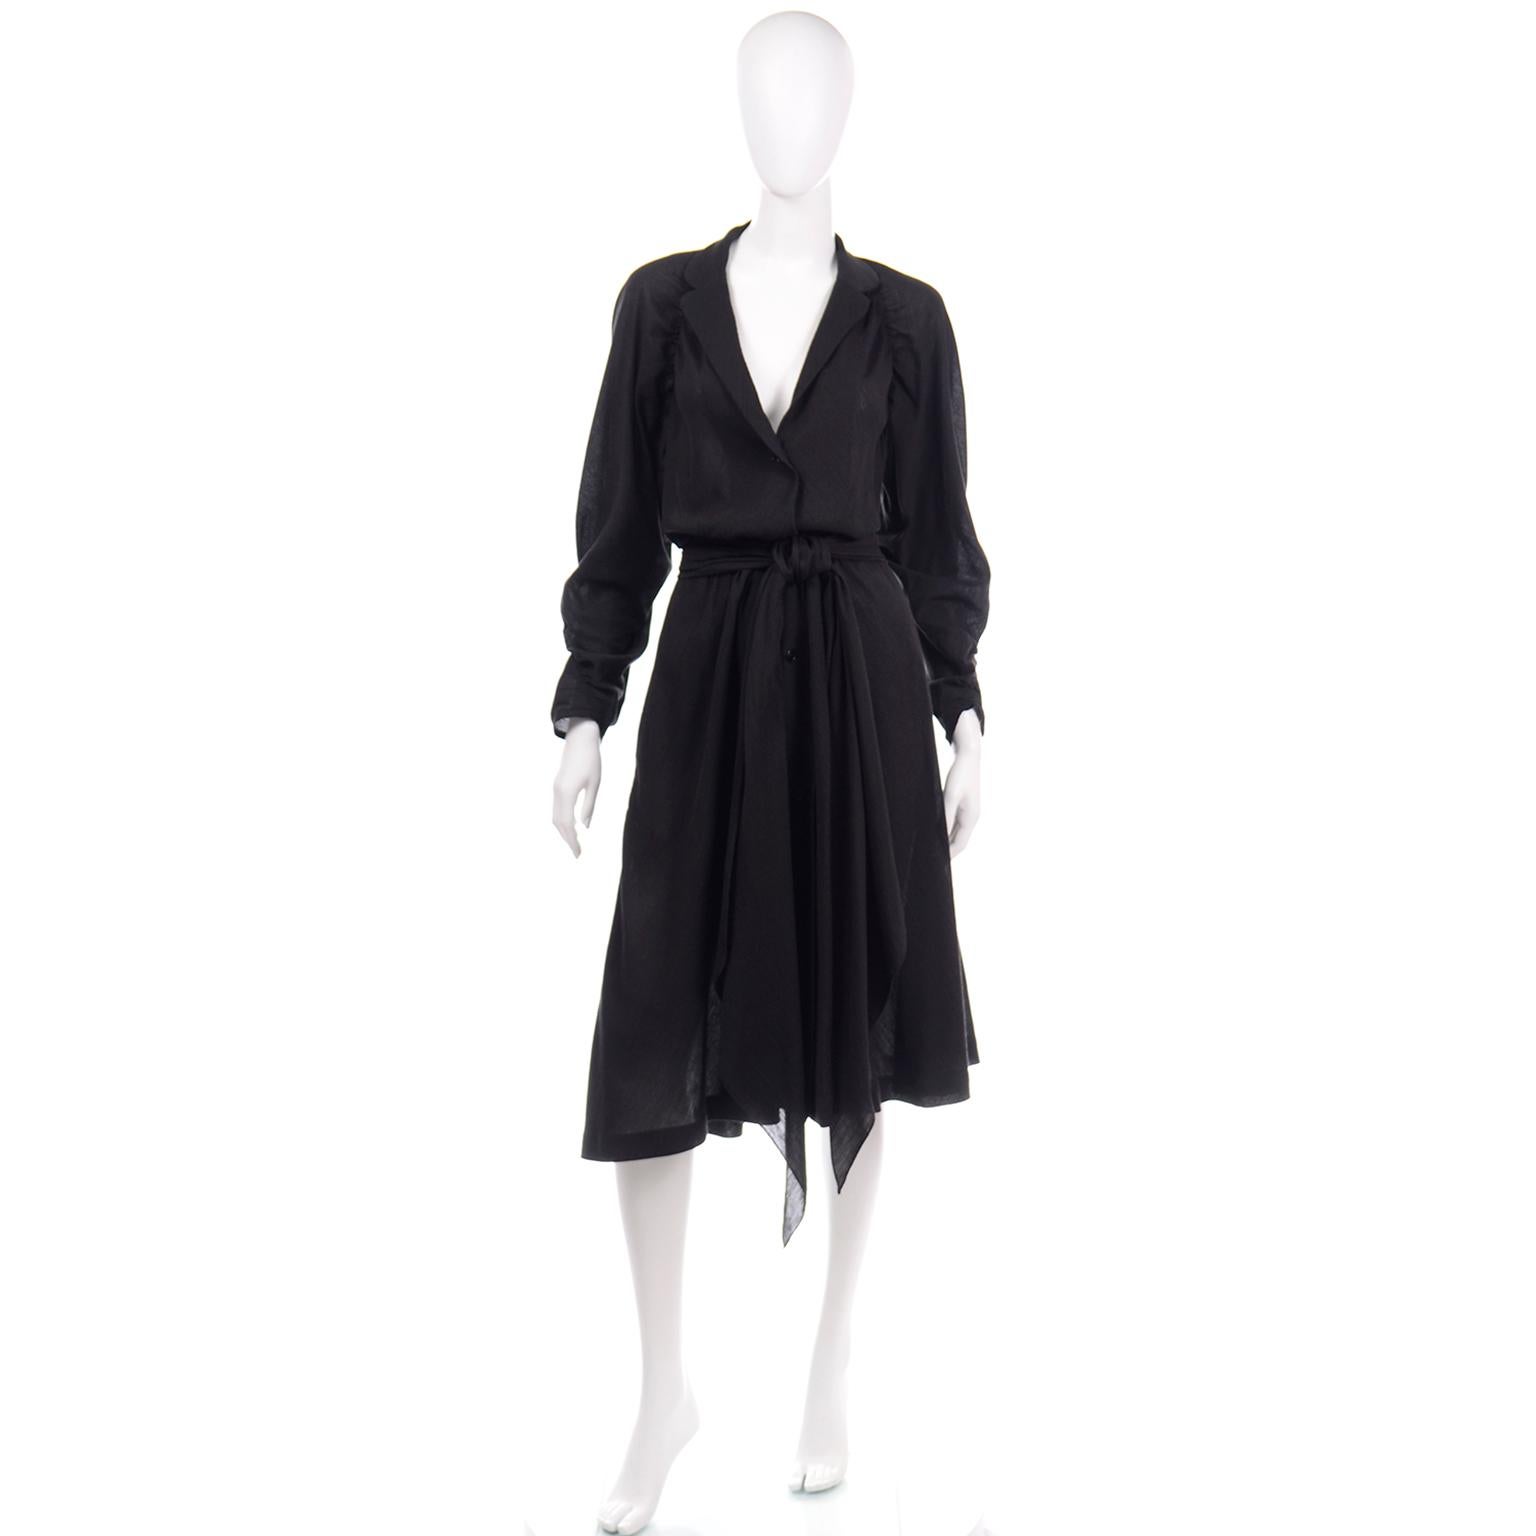 This is a vintage 1970's Halston black cotton voile dress with a deep v neckline and cinched underarm details that wrap around the back of the sleeves. Though it is effortless to wear, the dress has the familiar Halston styling and is so much